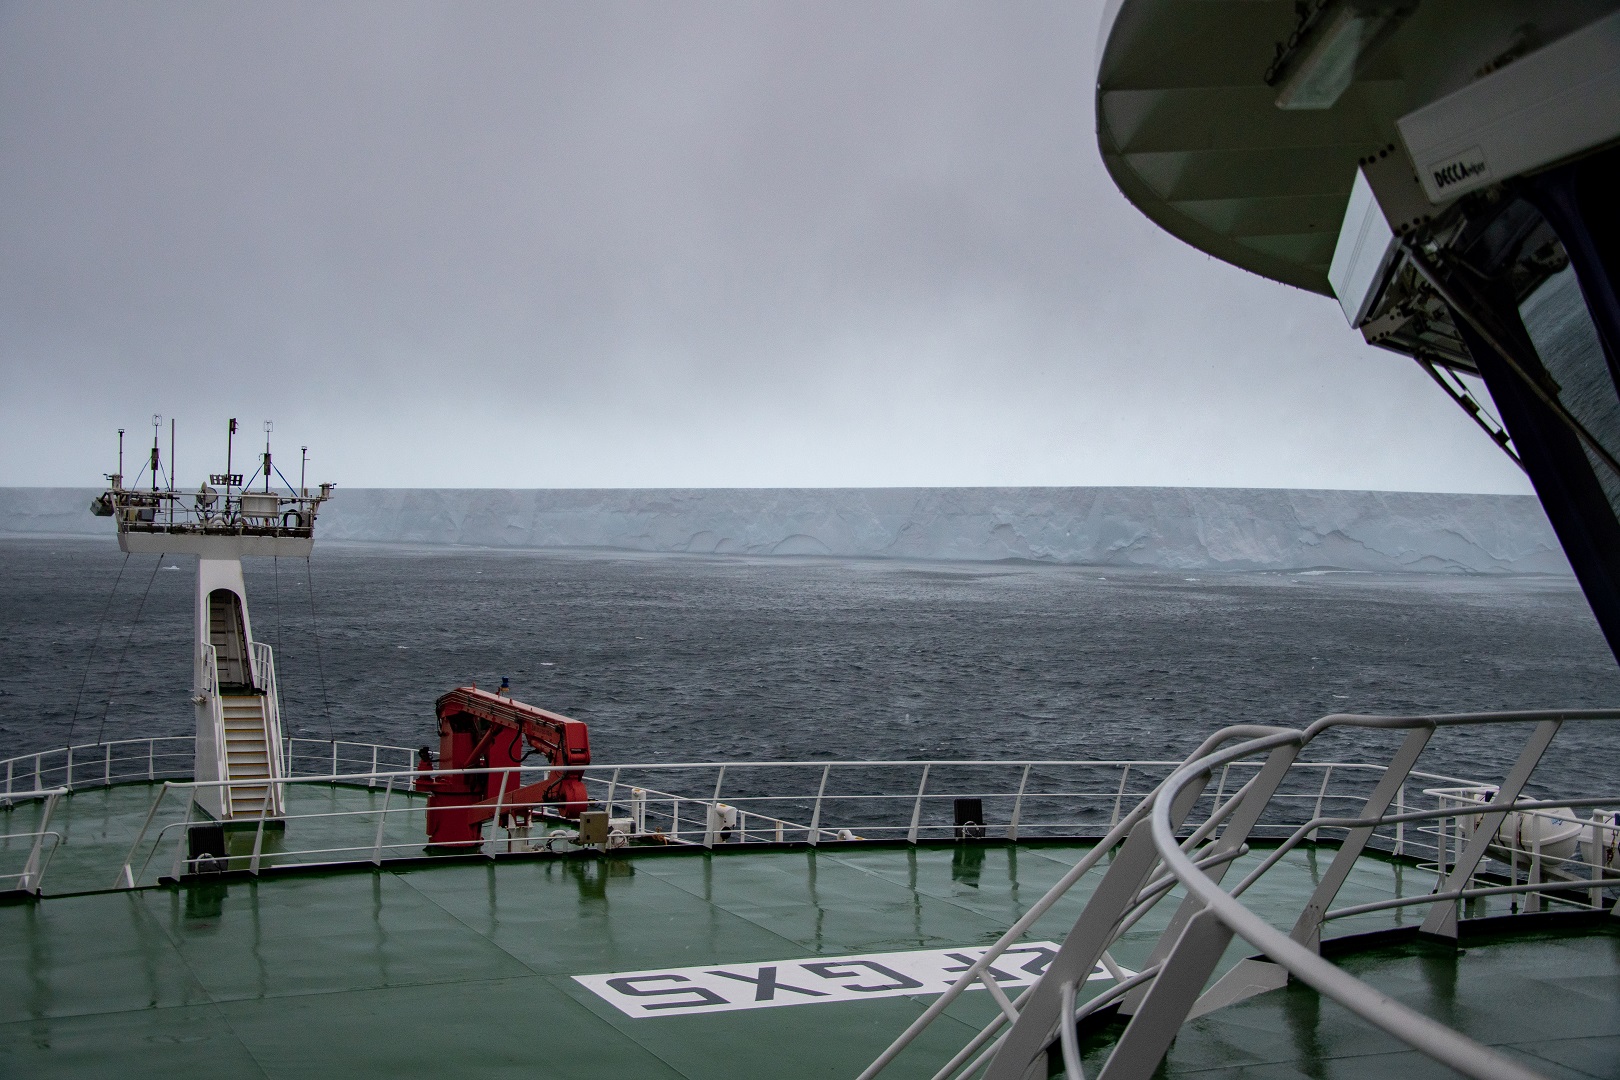 A view of the A76a iceberg from onboard the RRS Discovery